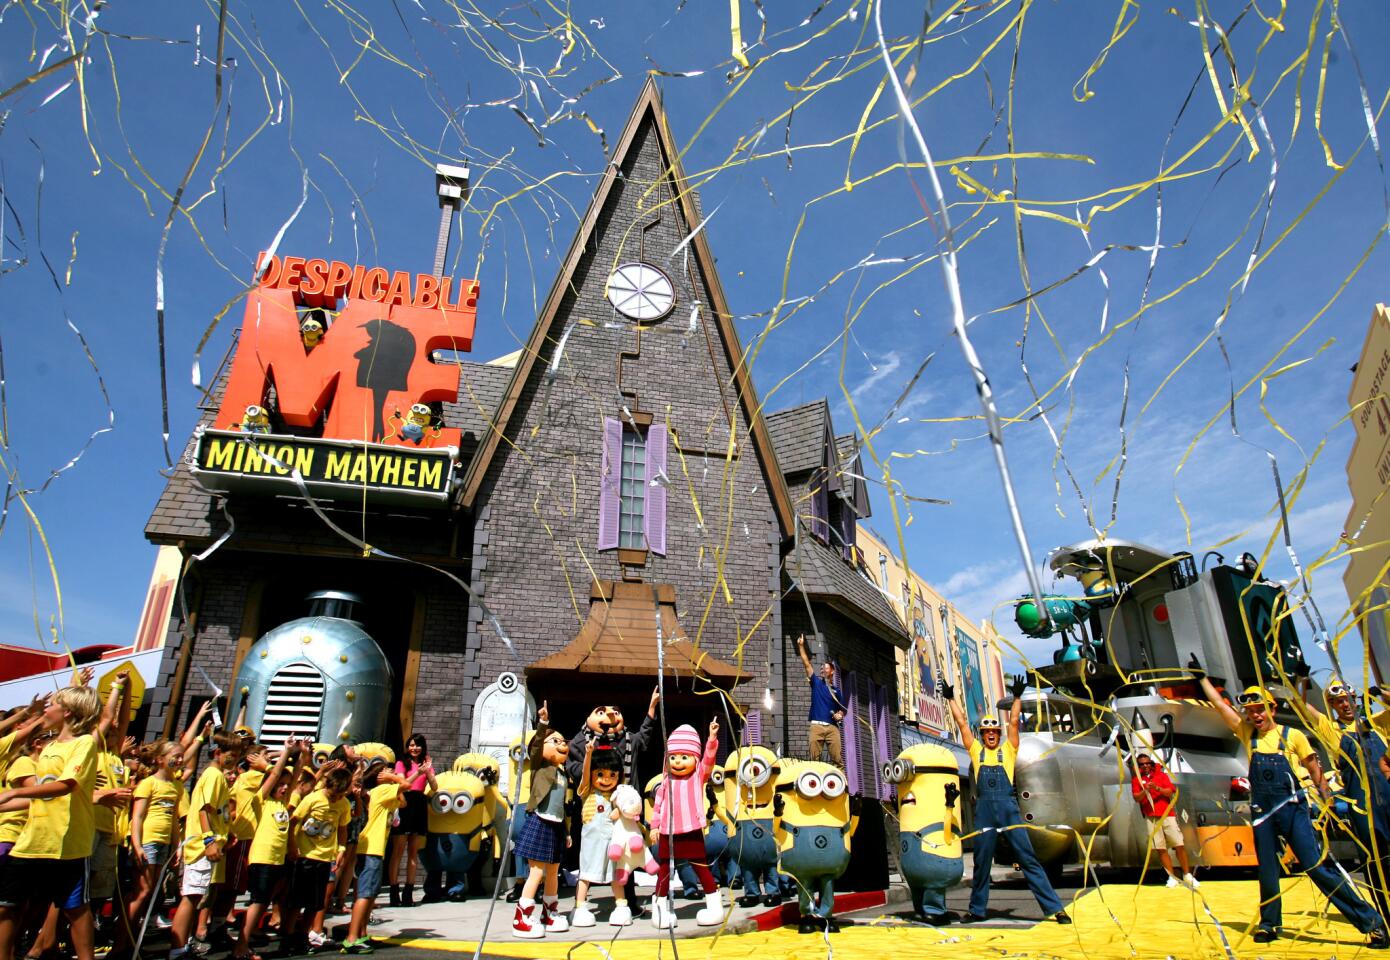 Despicable Me at Universal